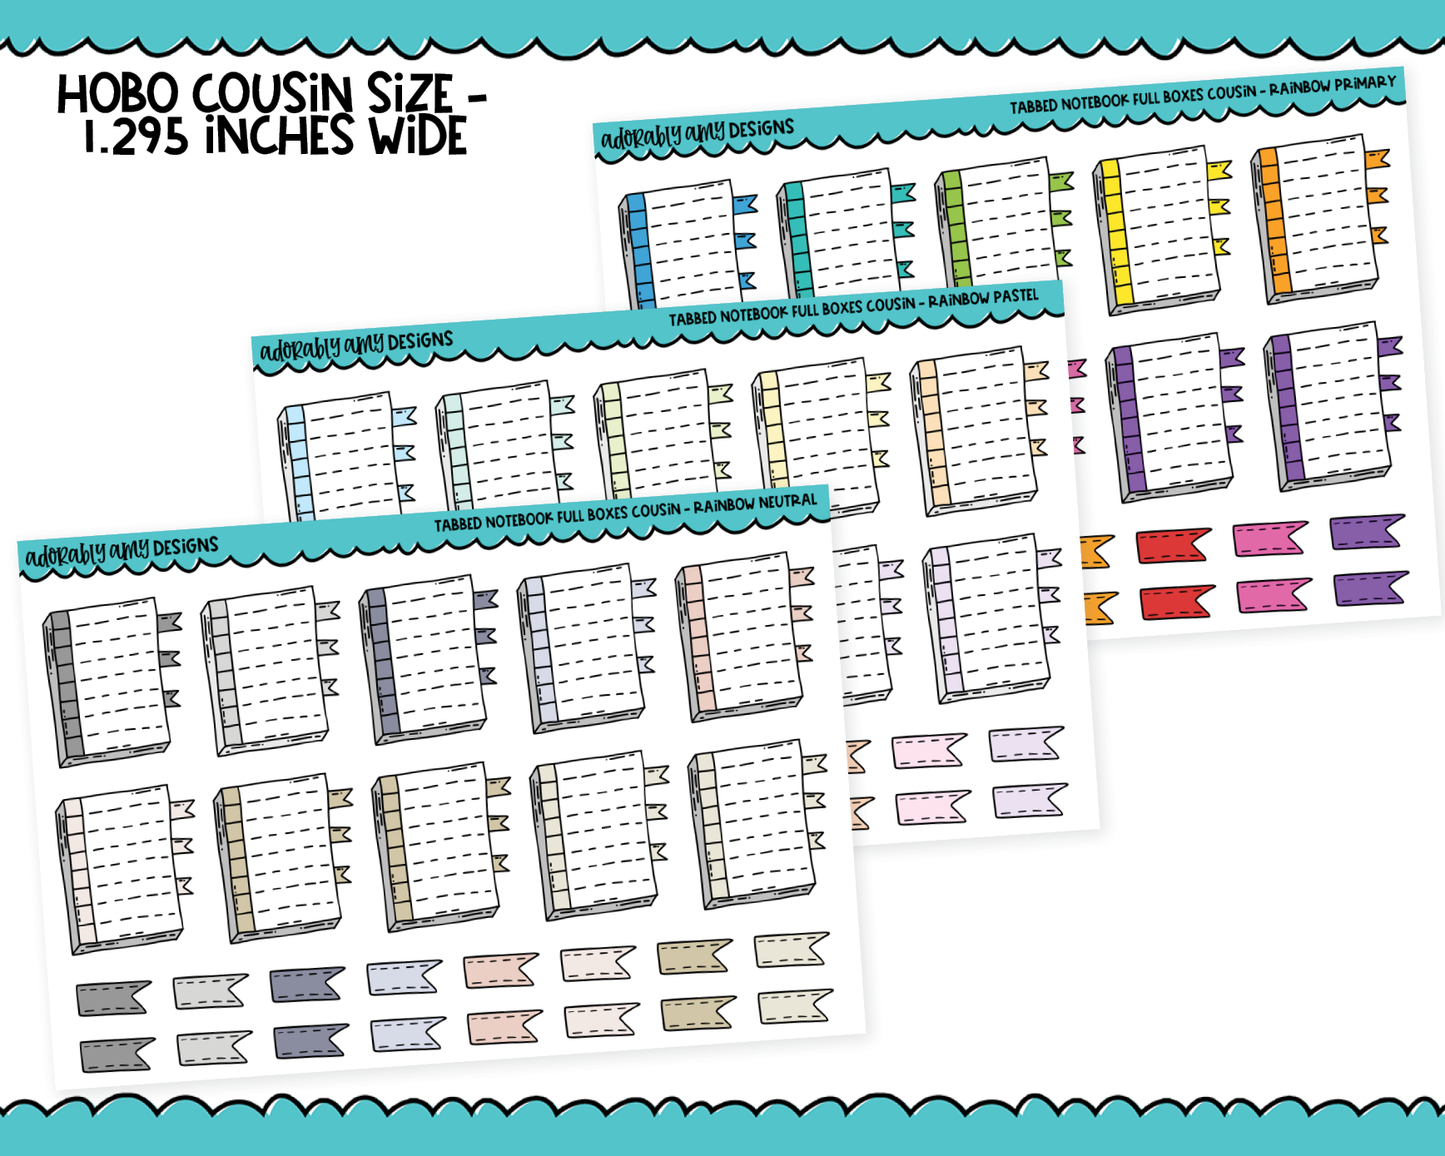 Hobo Cousin Tabbed Notebook Boxes Planner Stickers for Hobo Cousin or any Planner or Insert